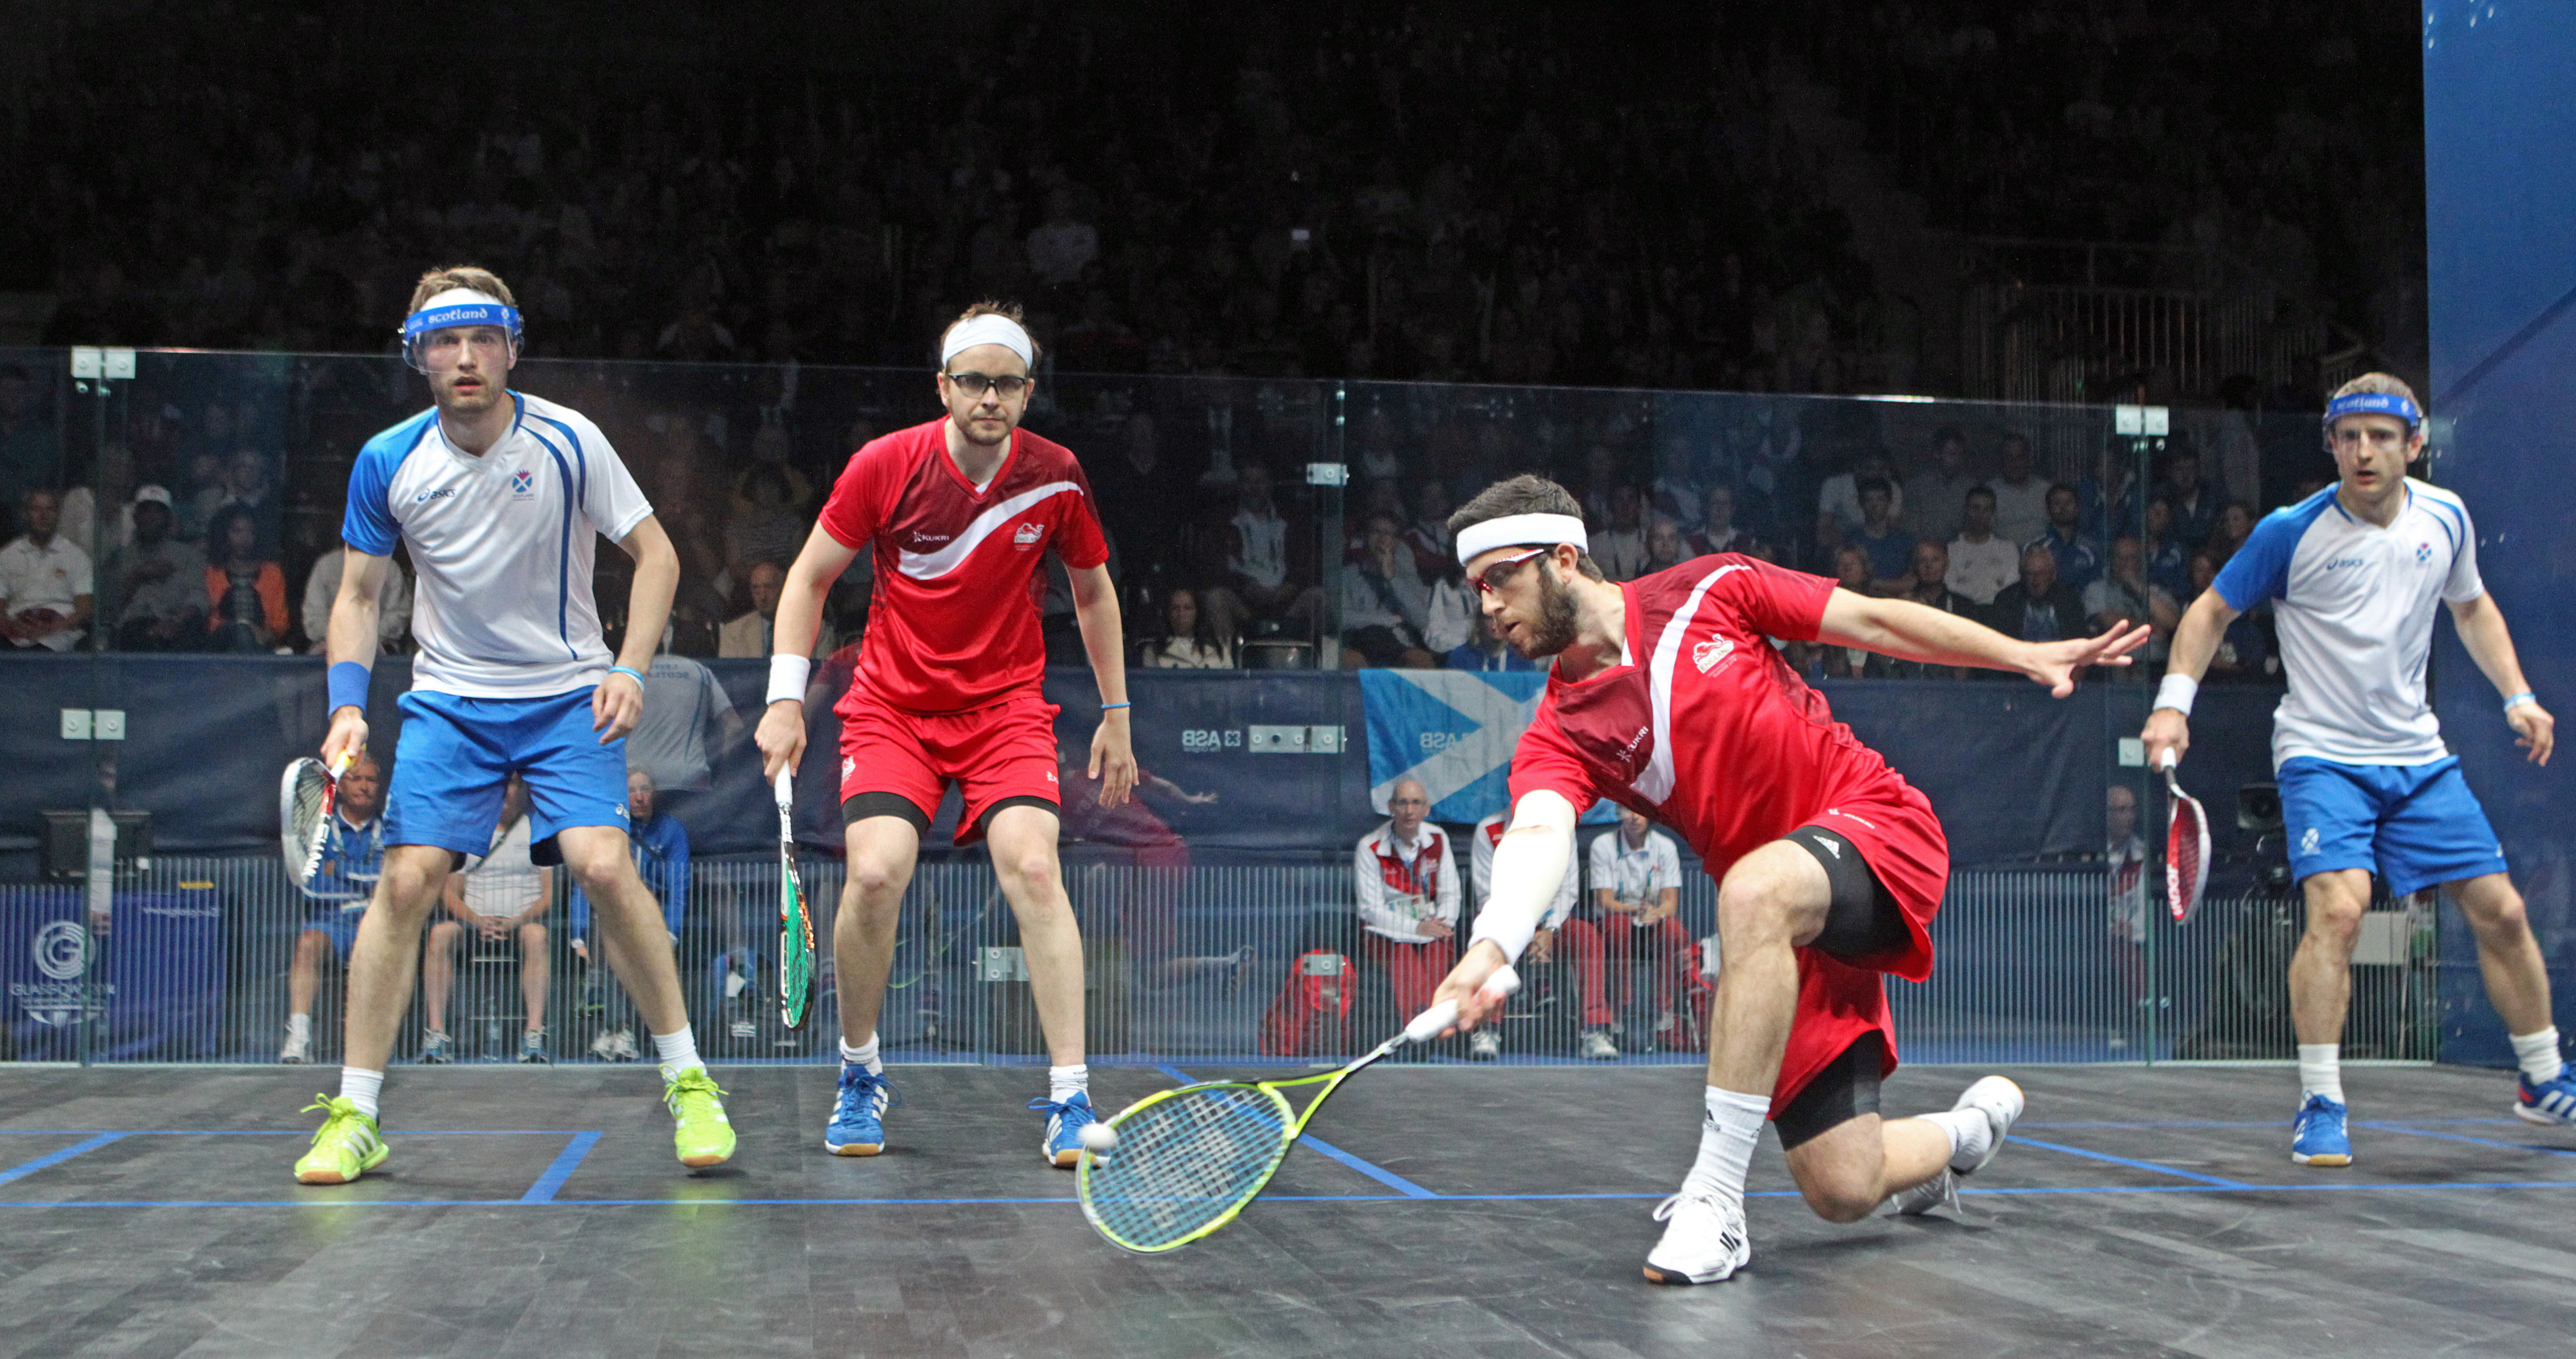 James Willstrop and Daryl Selby played together in the men's doubles event at the 2014 Commonwealth Games in Glasgow